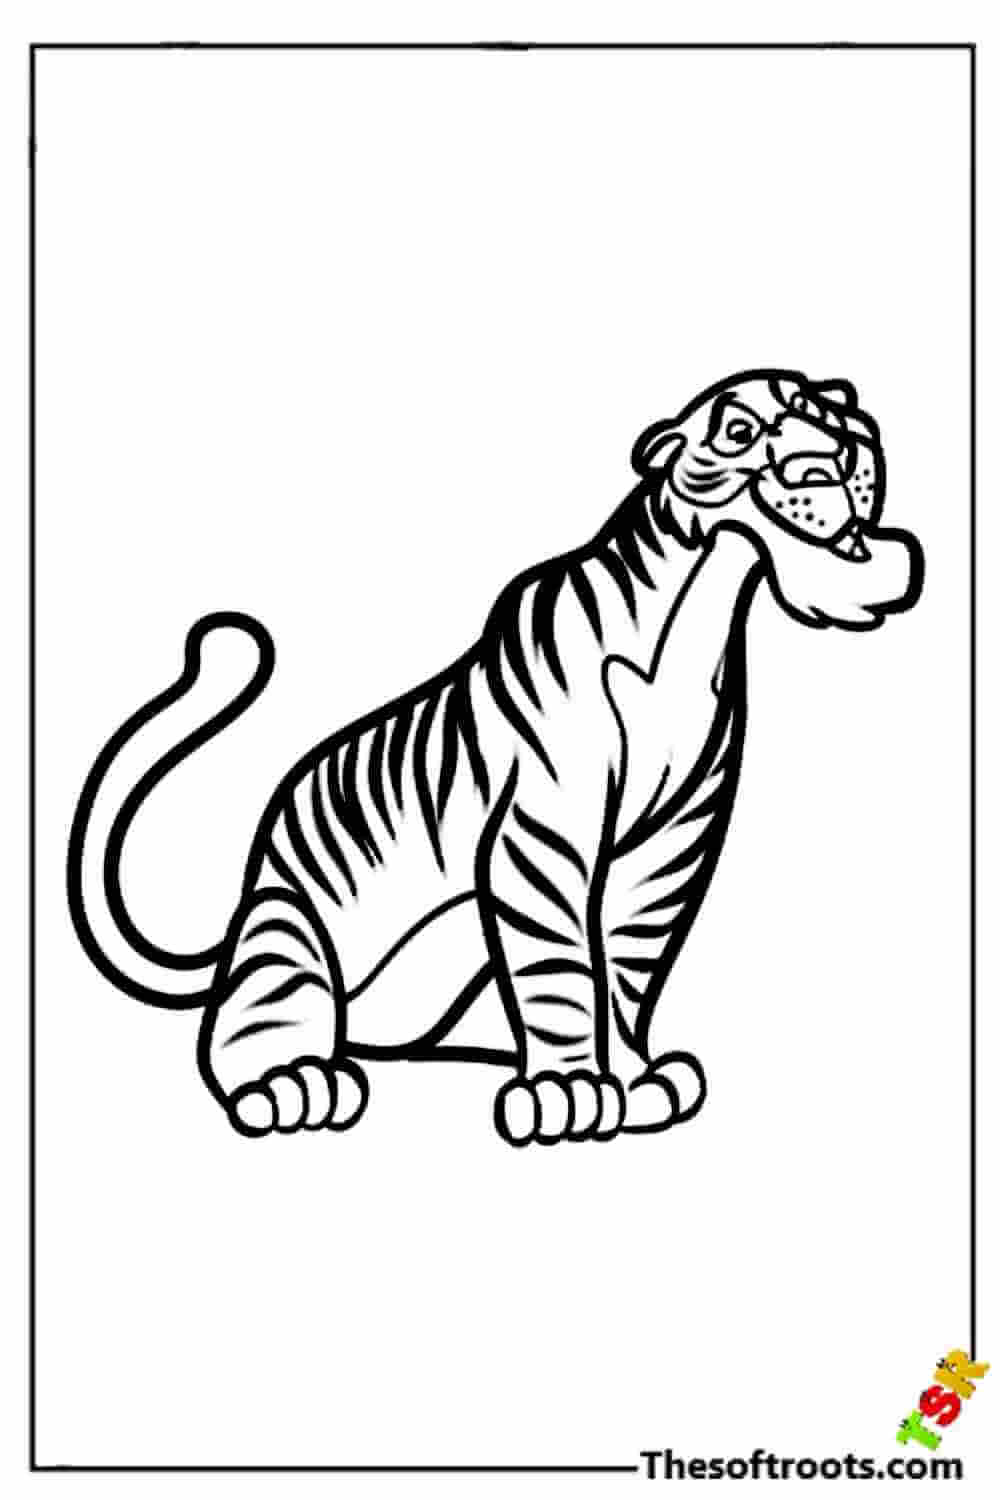 Shere khan coloring pages